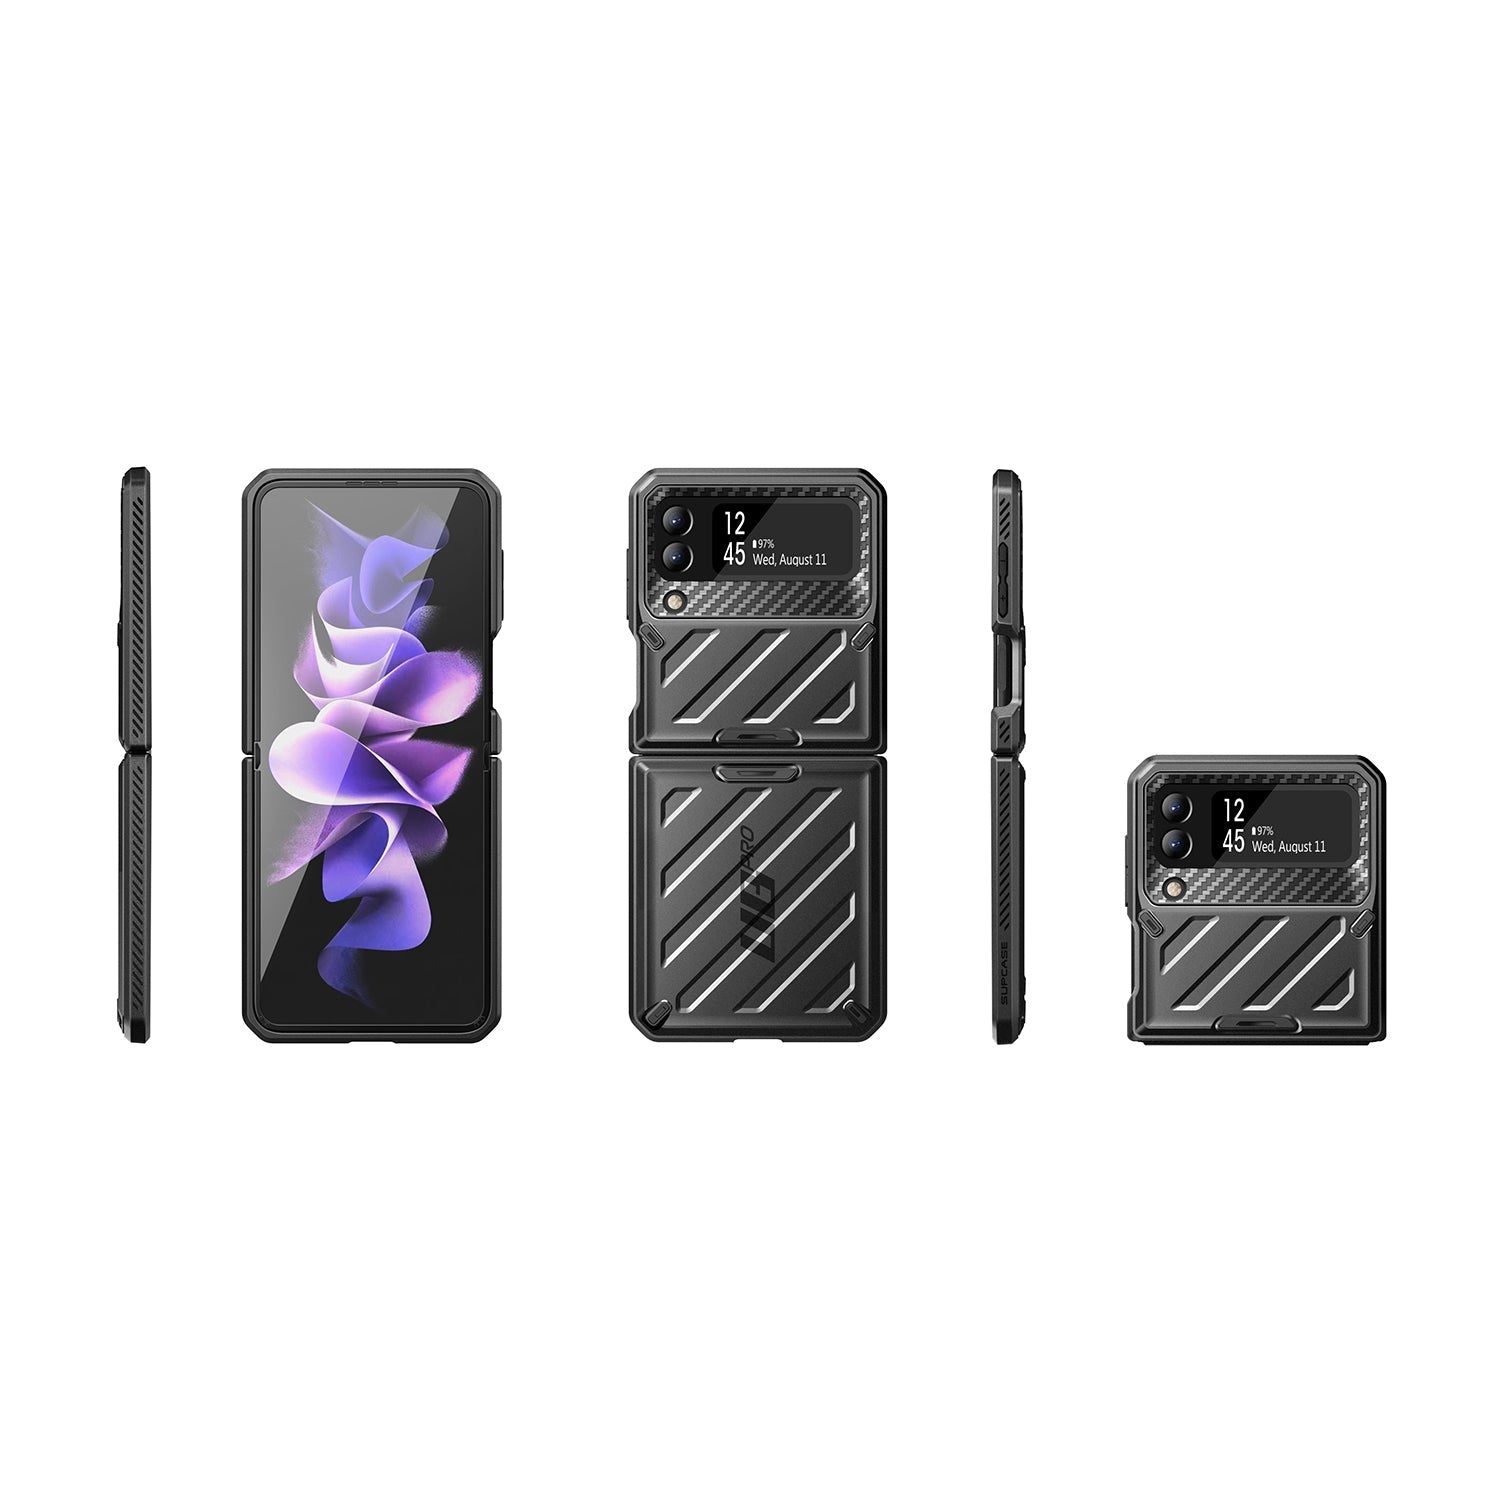 https://cdn.shopify.com/s/files/1/0113/9733/3049/products/supcase-unicorn-beetle-pro-series-case-for-samsung-galaxy-z-flip-4-5g-2022-full-body-dual-layer-rugged-protective-case-with-holster-mobile-phone-cases-supcase-745145.jpg?v=1660571819&width=1500